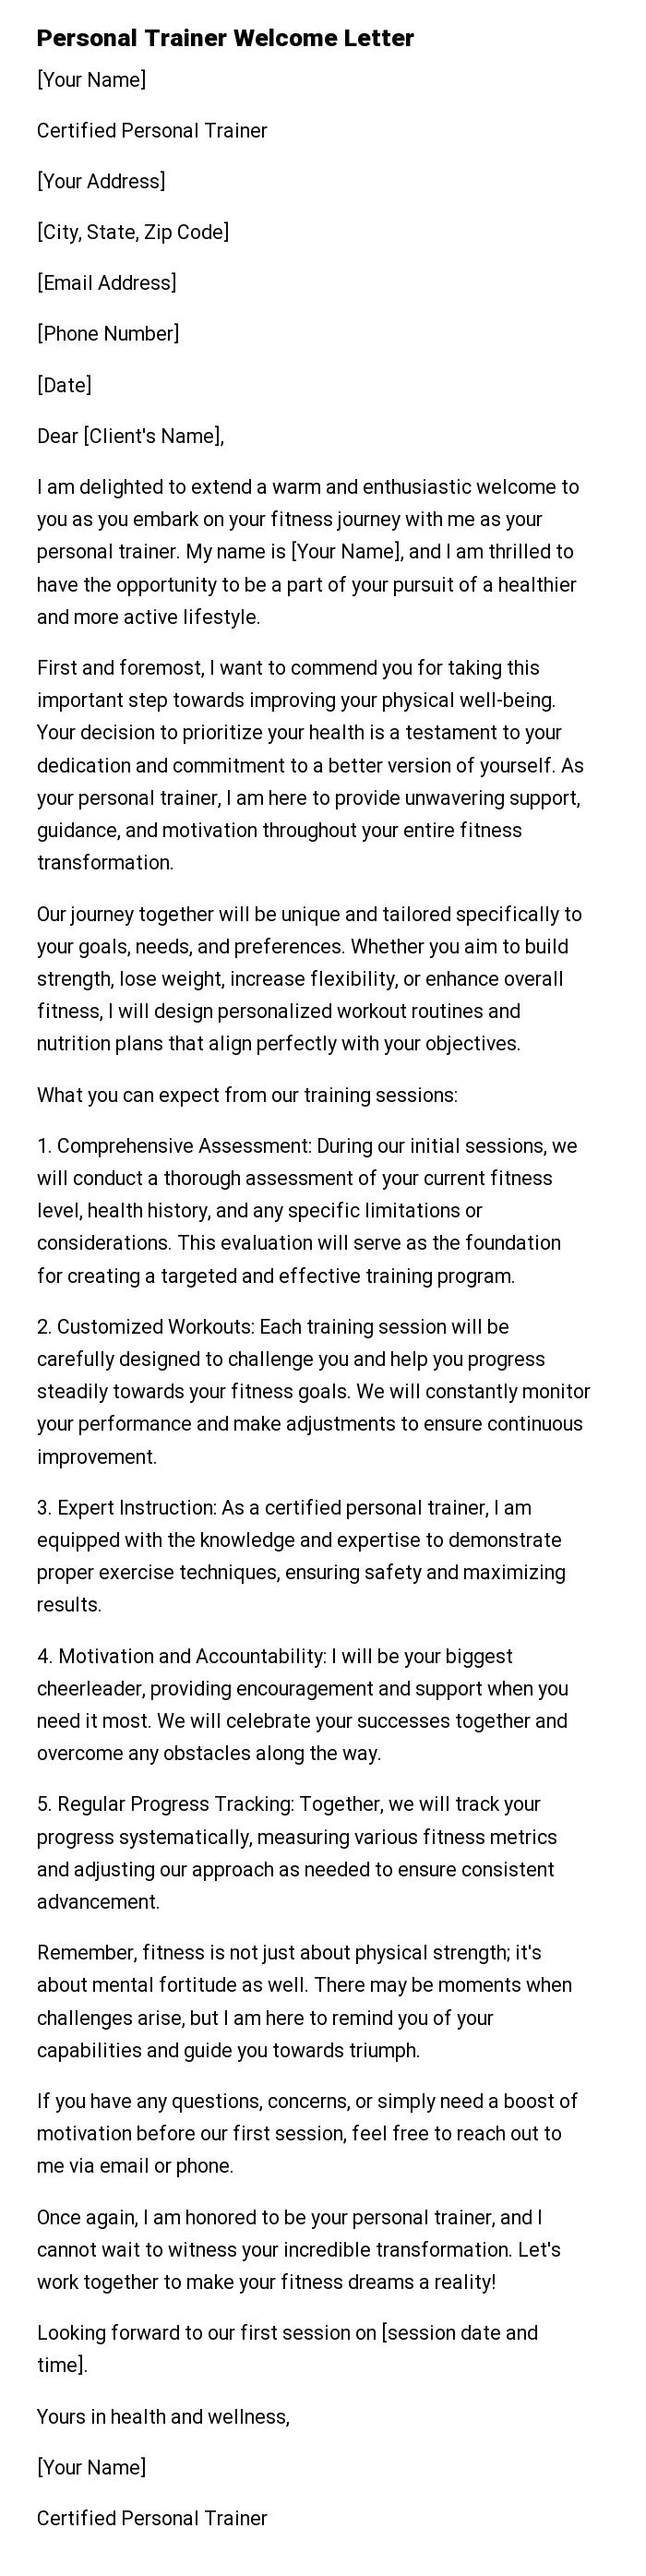 Personal Trainer Welcome Letter